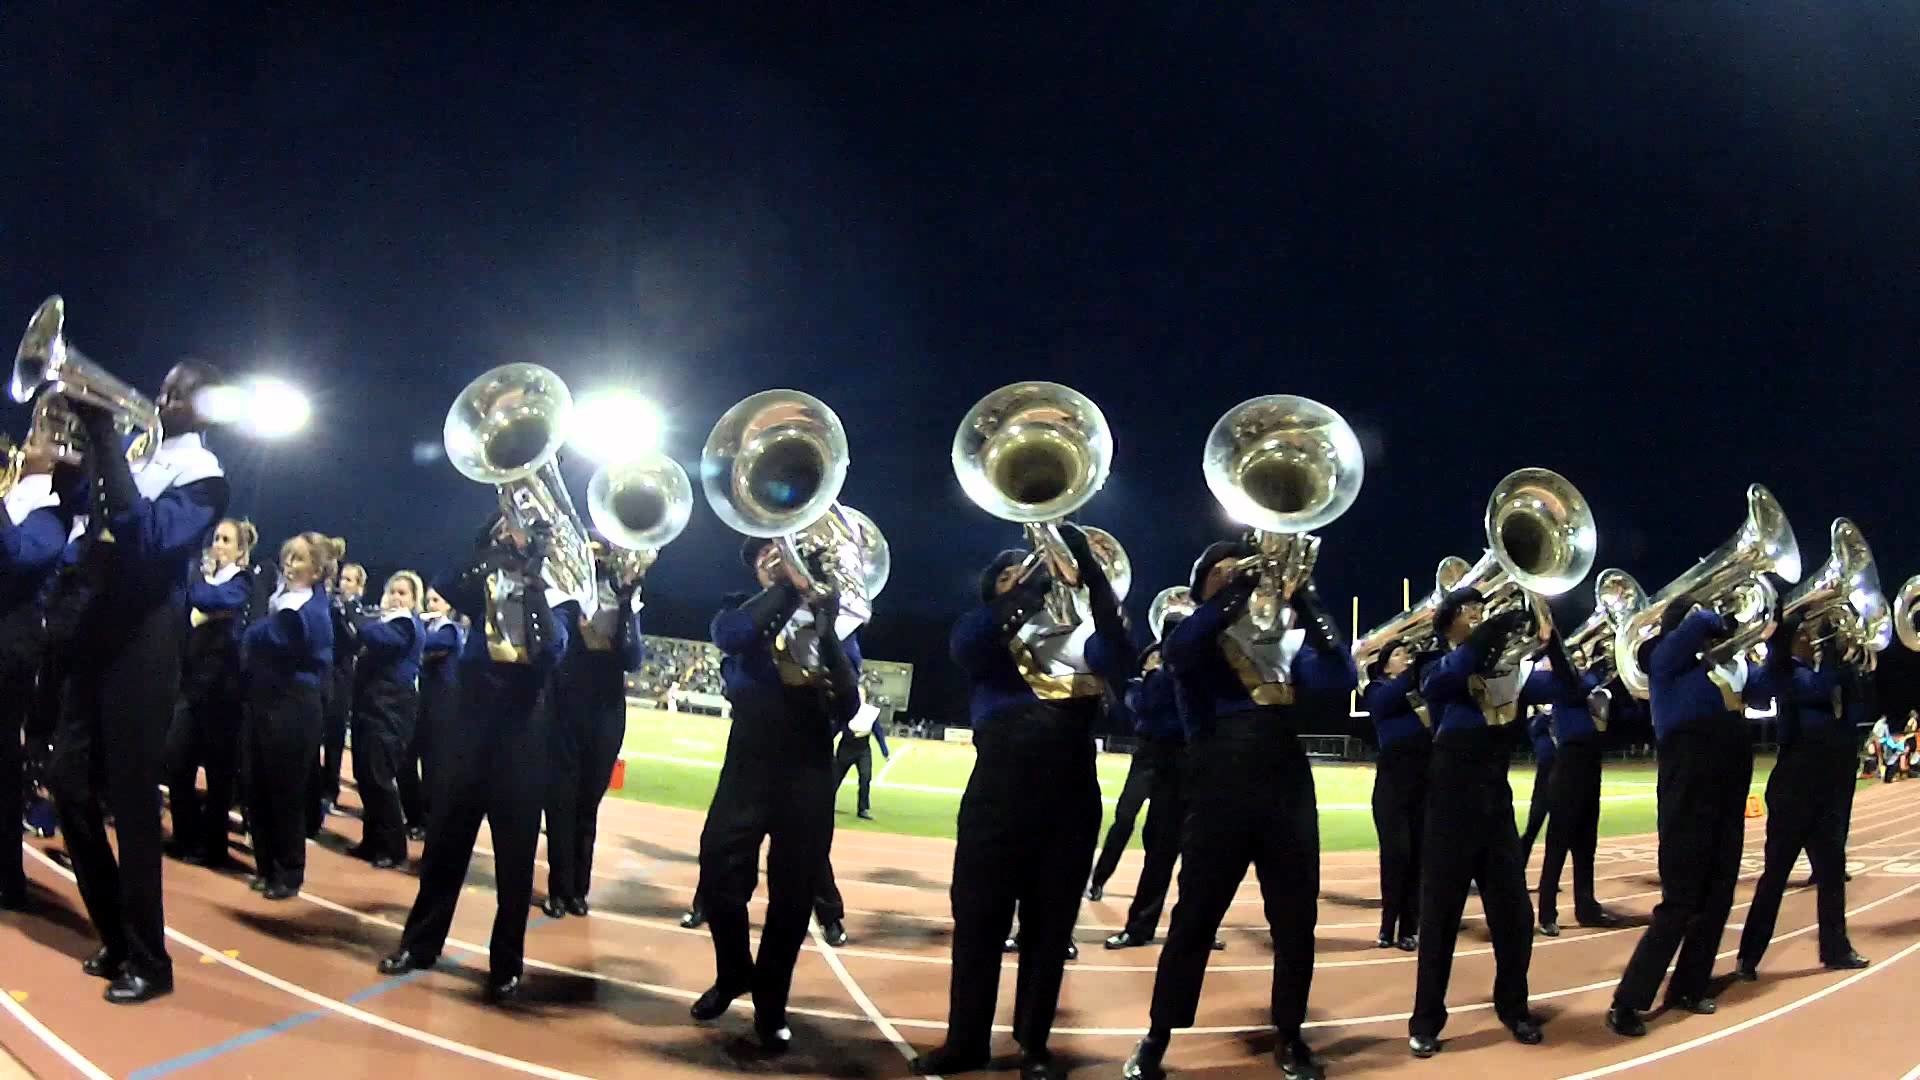 1920x1080 Images Of Marching Band